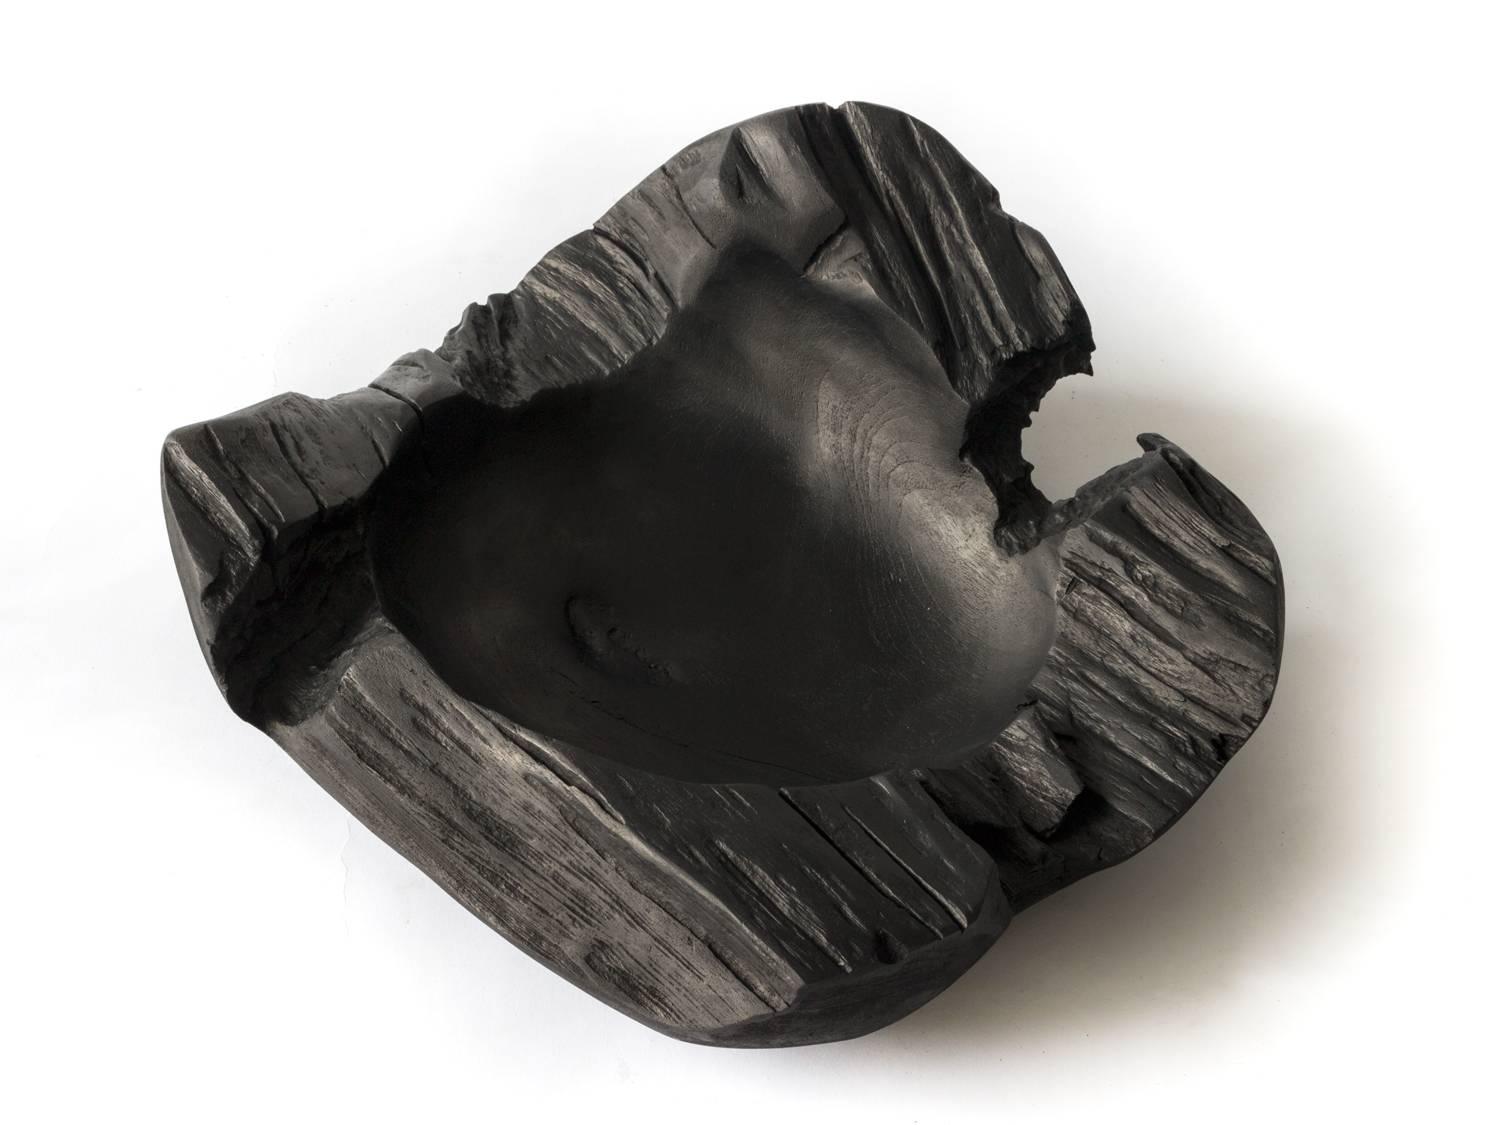 Hand-Carved Reclaimed Wood Bowl by Lukas Machnik available from LMD/studio

One-of-a-kind hand-carved reclaimed wood bowl ebonized with calligraphy ink by Lukas Machnik. Each bowl is entirely unique. 

hand-carved wood bowls by Lukas Machnik are